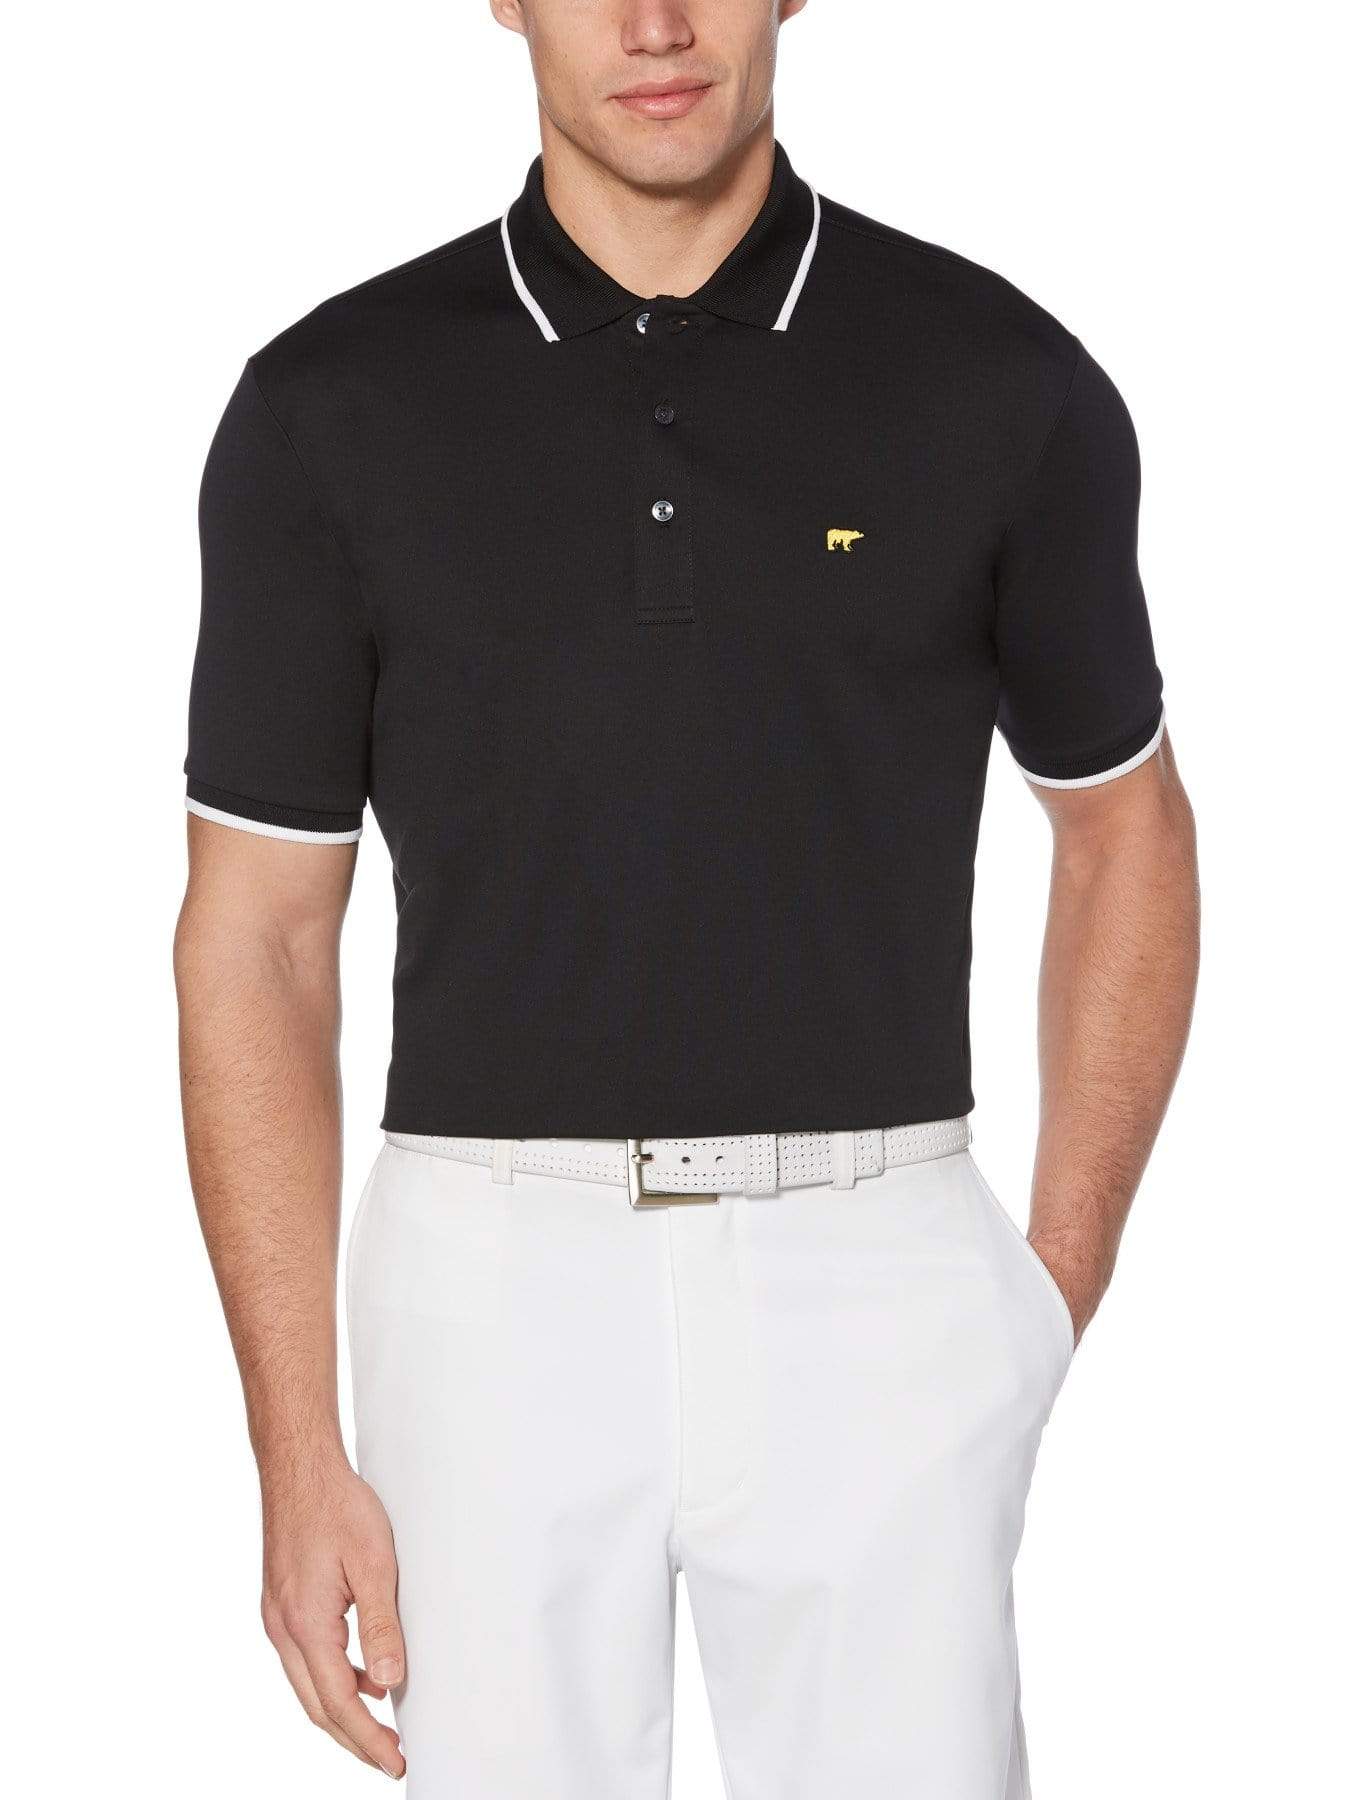 Jack Nicklaus Mens Solid Golf Polo Shirt w/ Cuff Tipping, Size Large, Black, 100% Polyester | Golf Apparel Shop